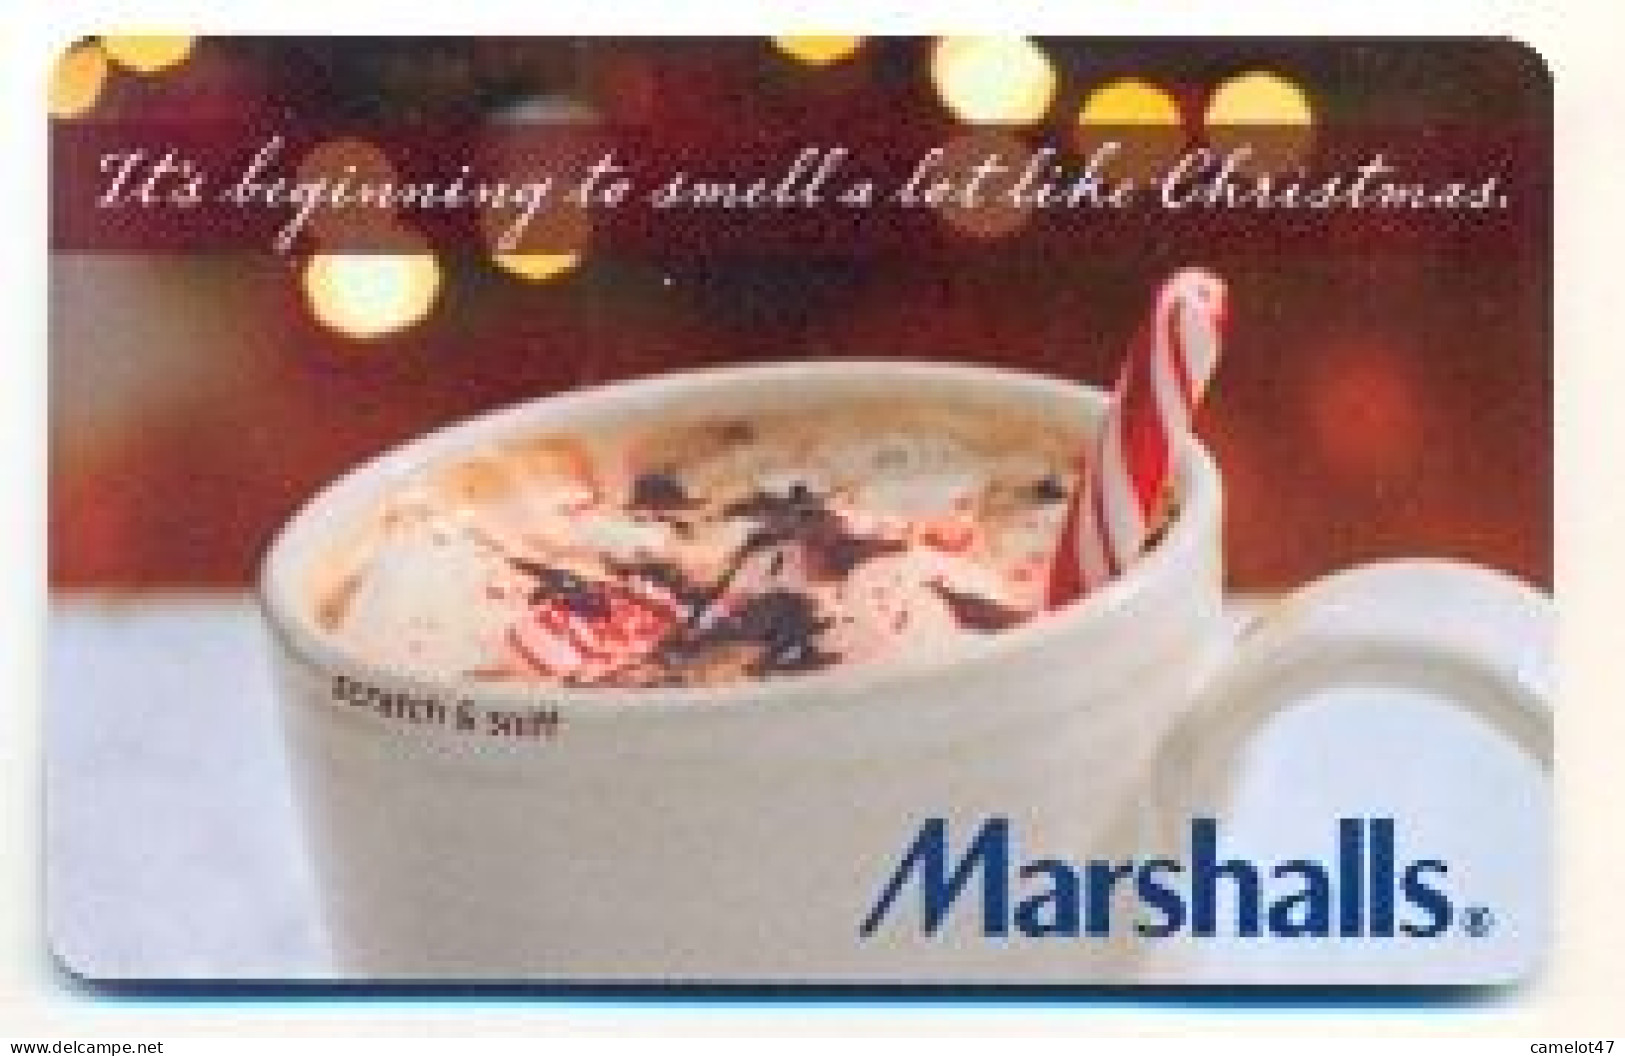 Marshalls, U.S.A., Carte Cadeau Pour Collection, Sans Valeur, # Marshalls-54 - Gift And Loyalty Cards